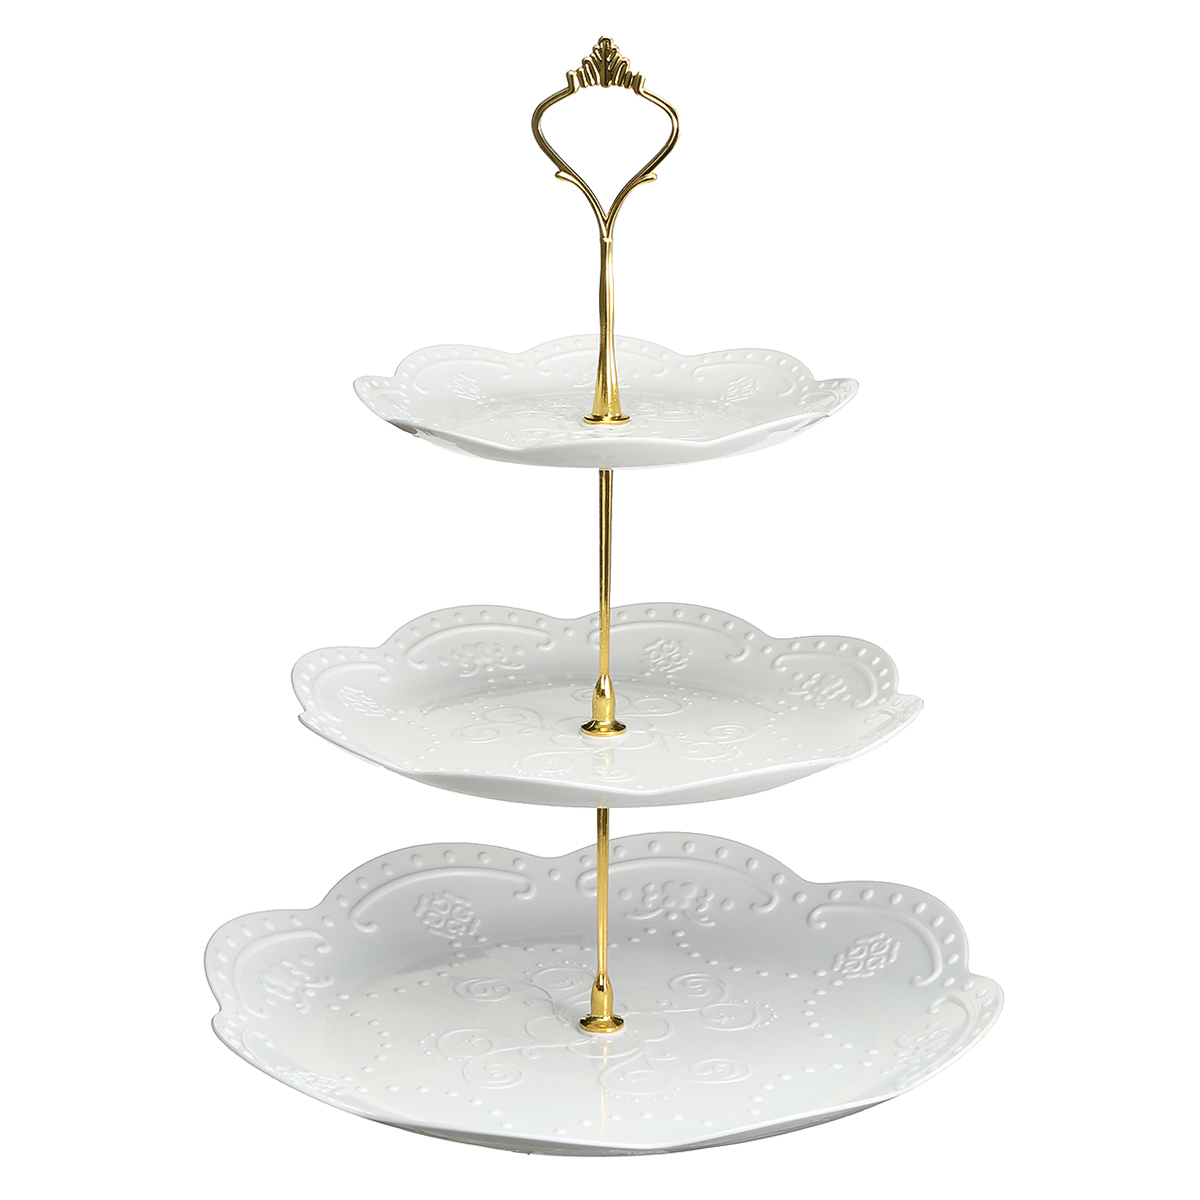 European-style-23-Tier-Fruit-Plate-Dessert-Tray-Cake-Table-Multi-layer-Cake-Stand-Cake-Setting-Table-1926348-12